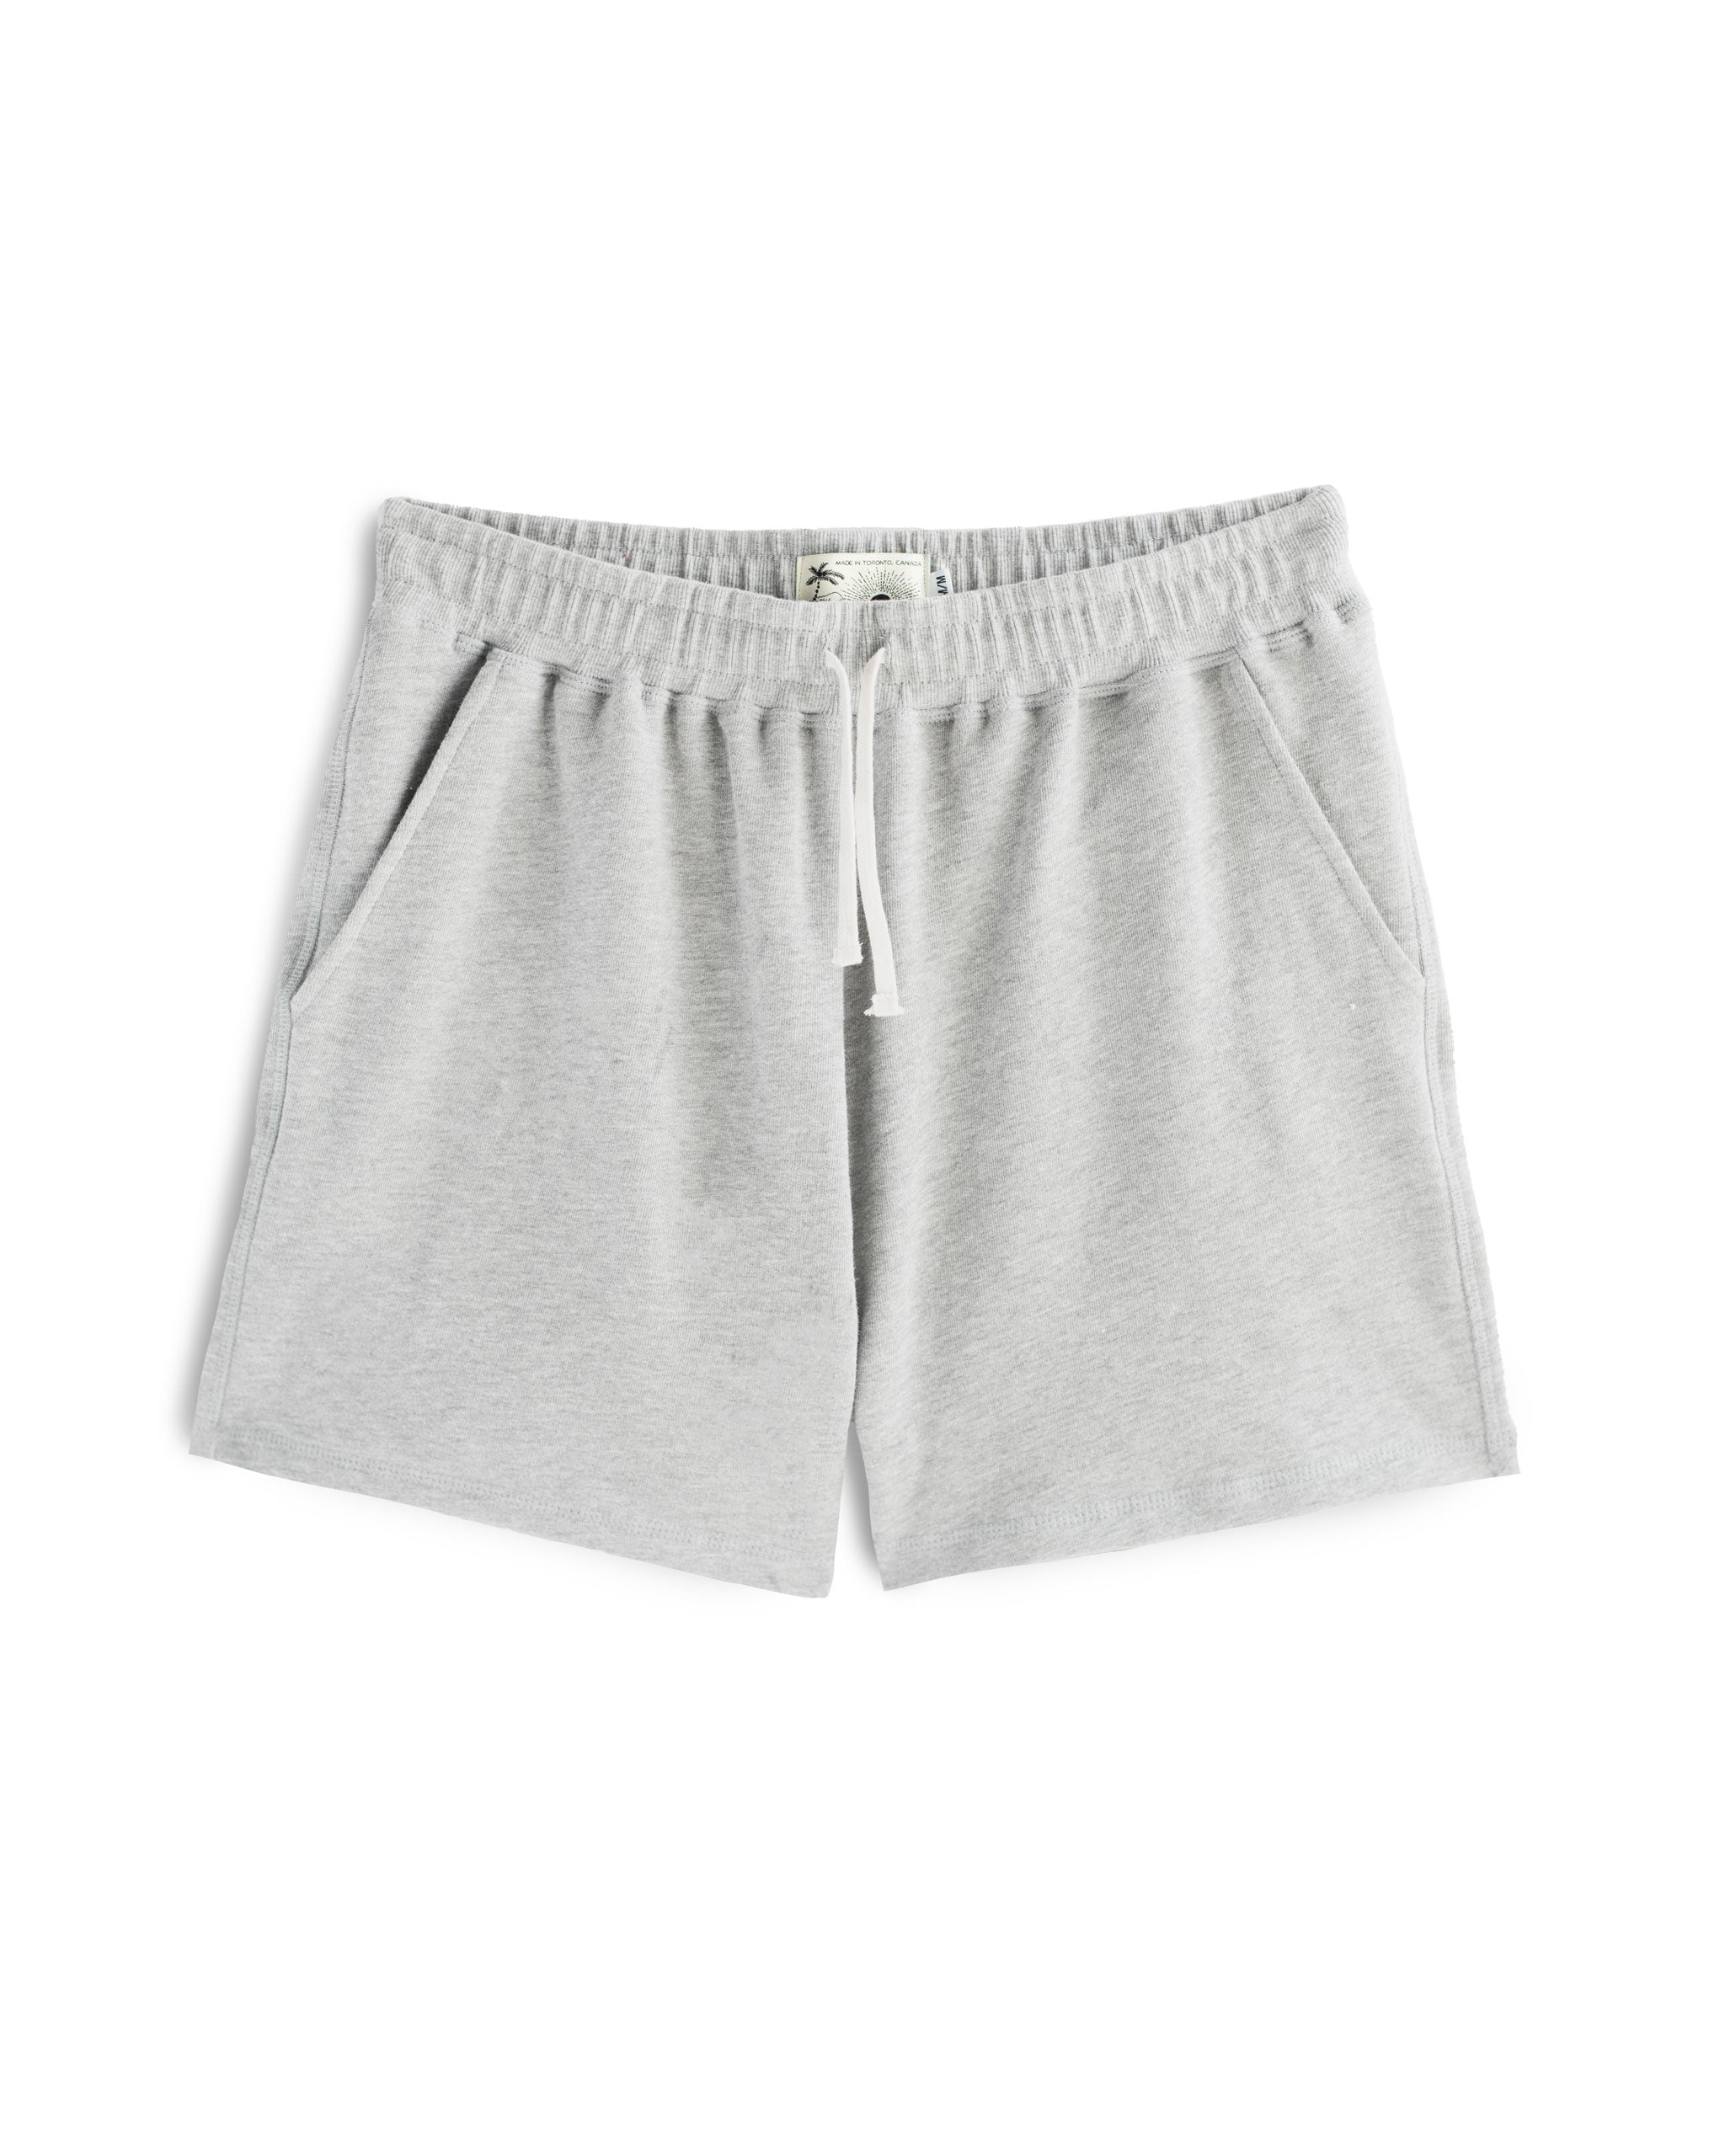 Grey french terry cotton sweat shorts